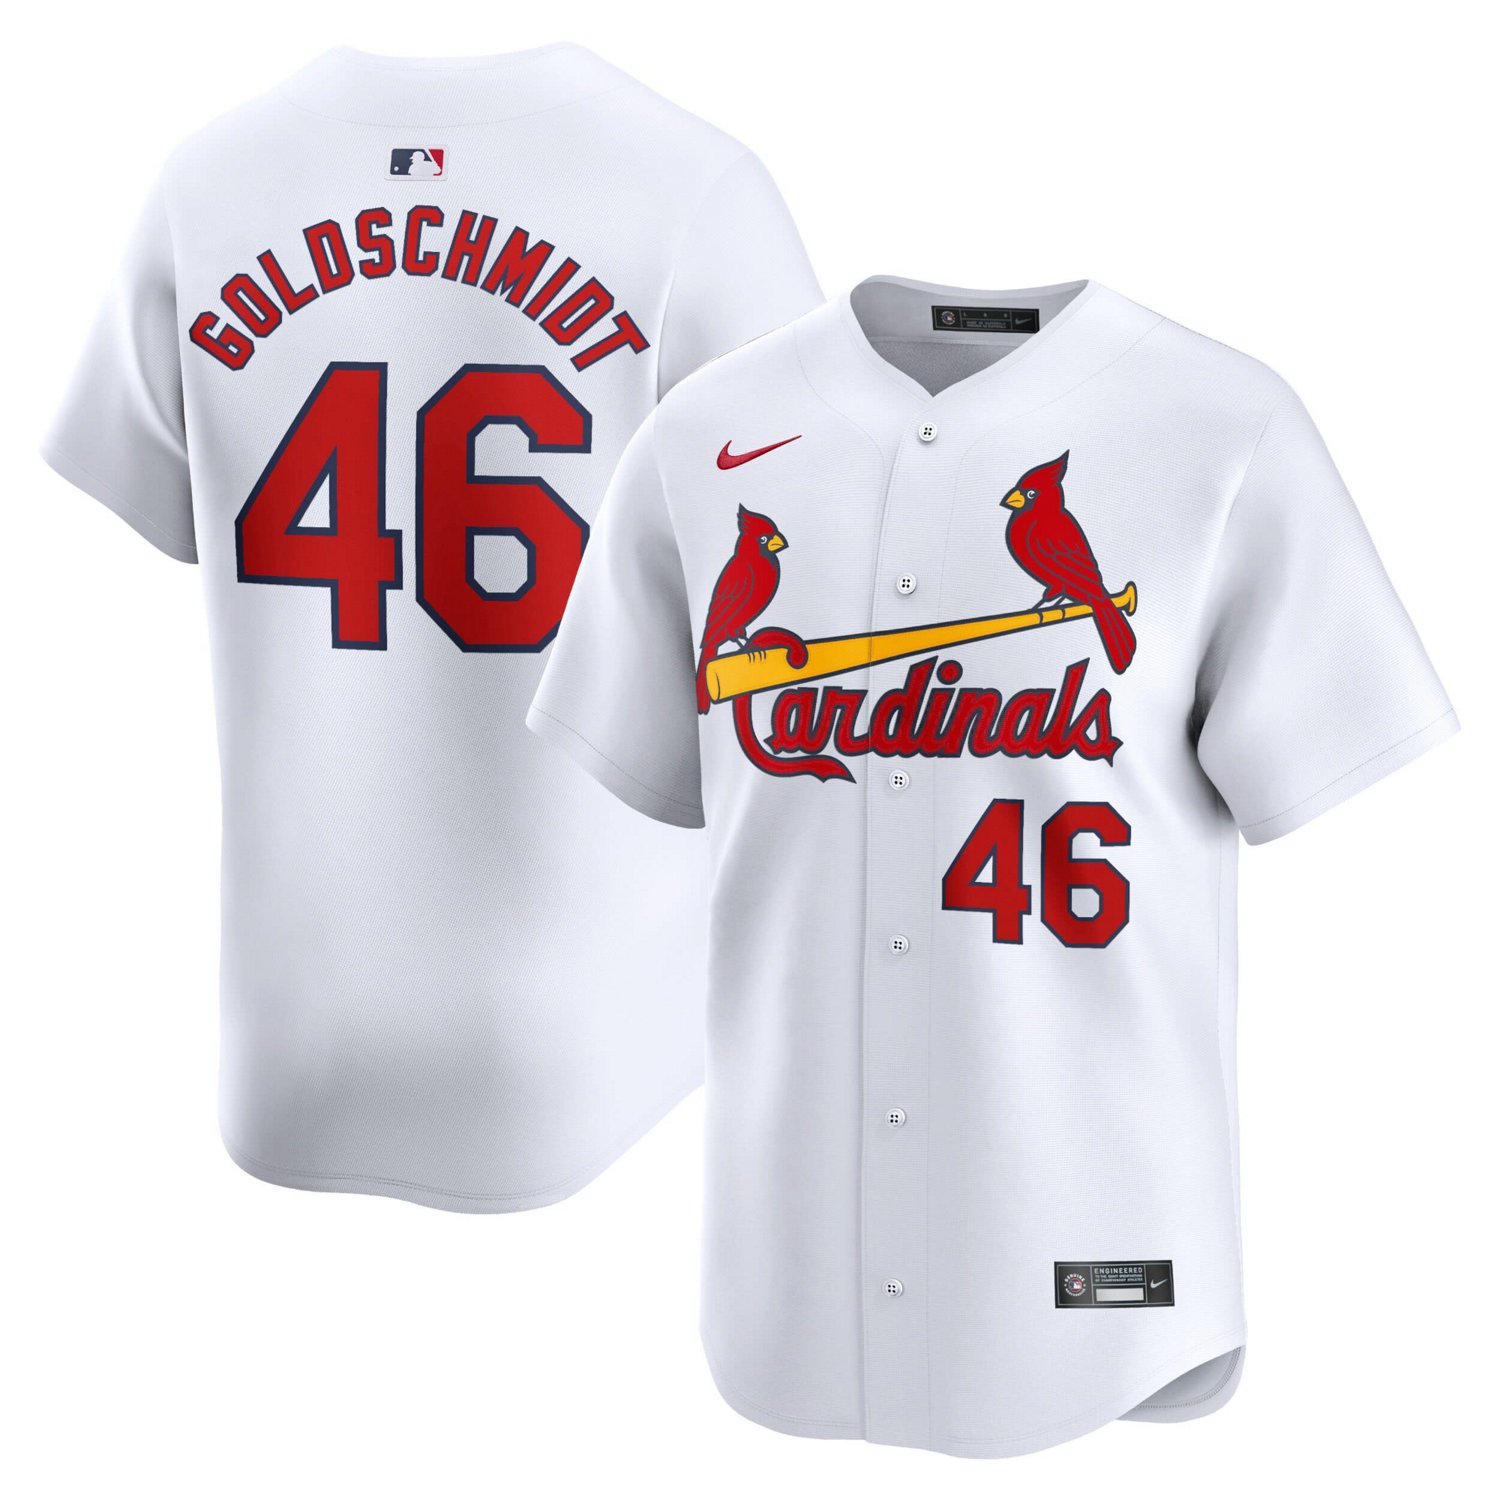 st. louis cardinals mlb jersey youth size